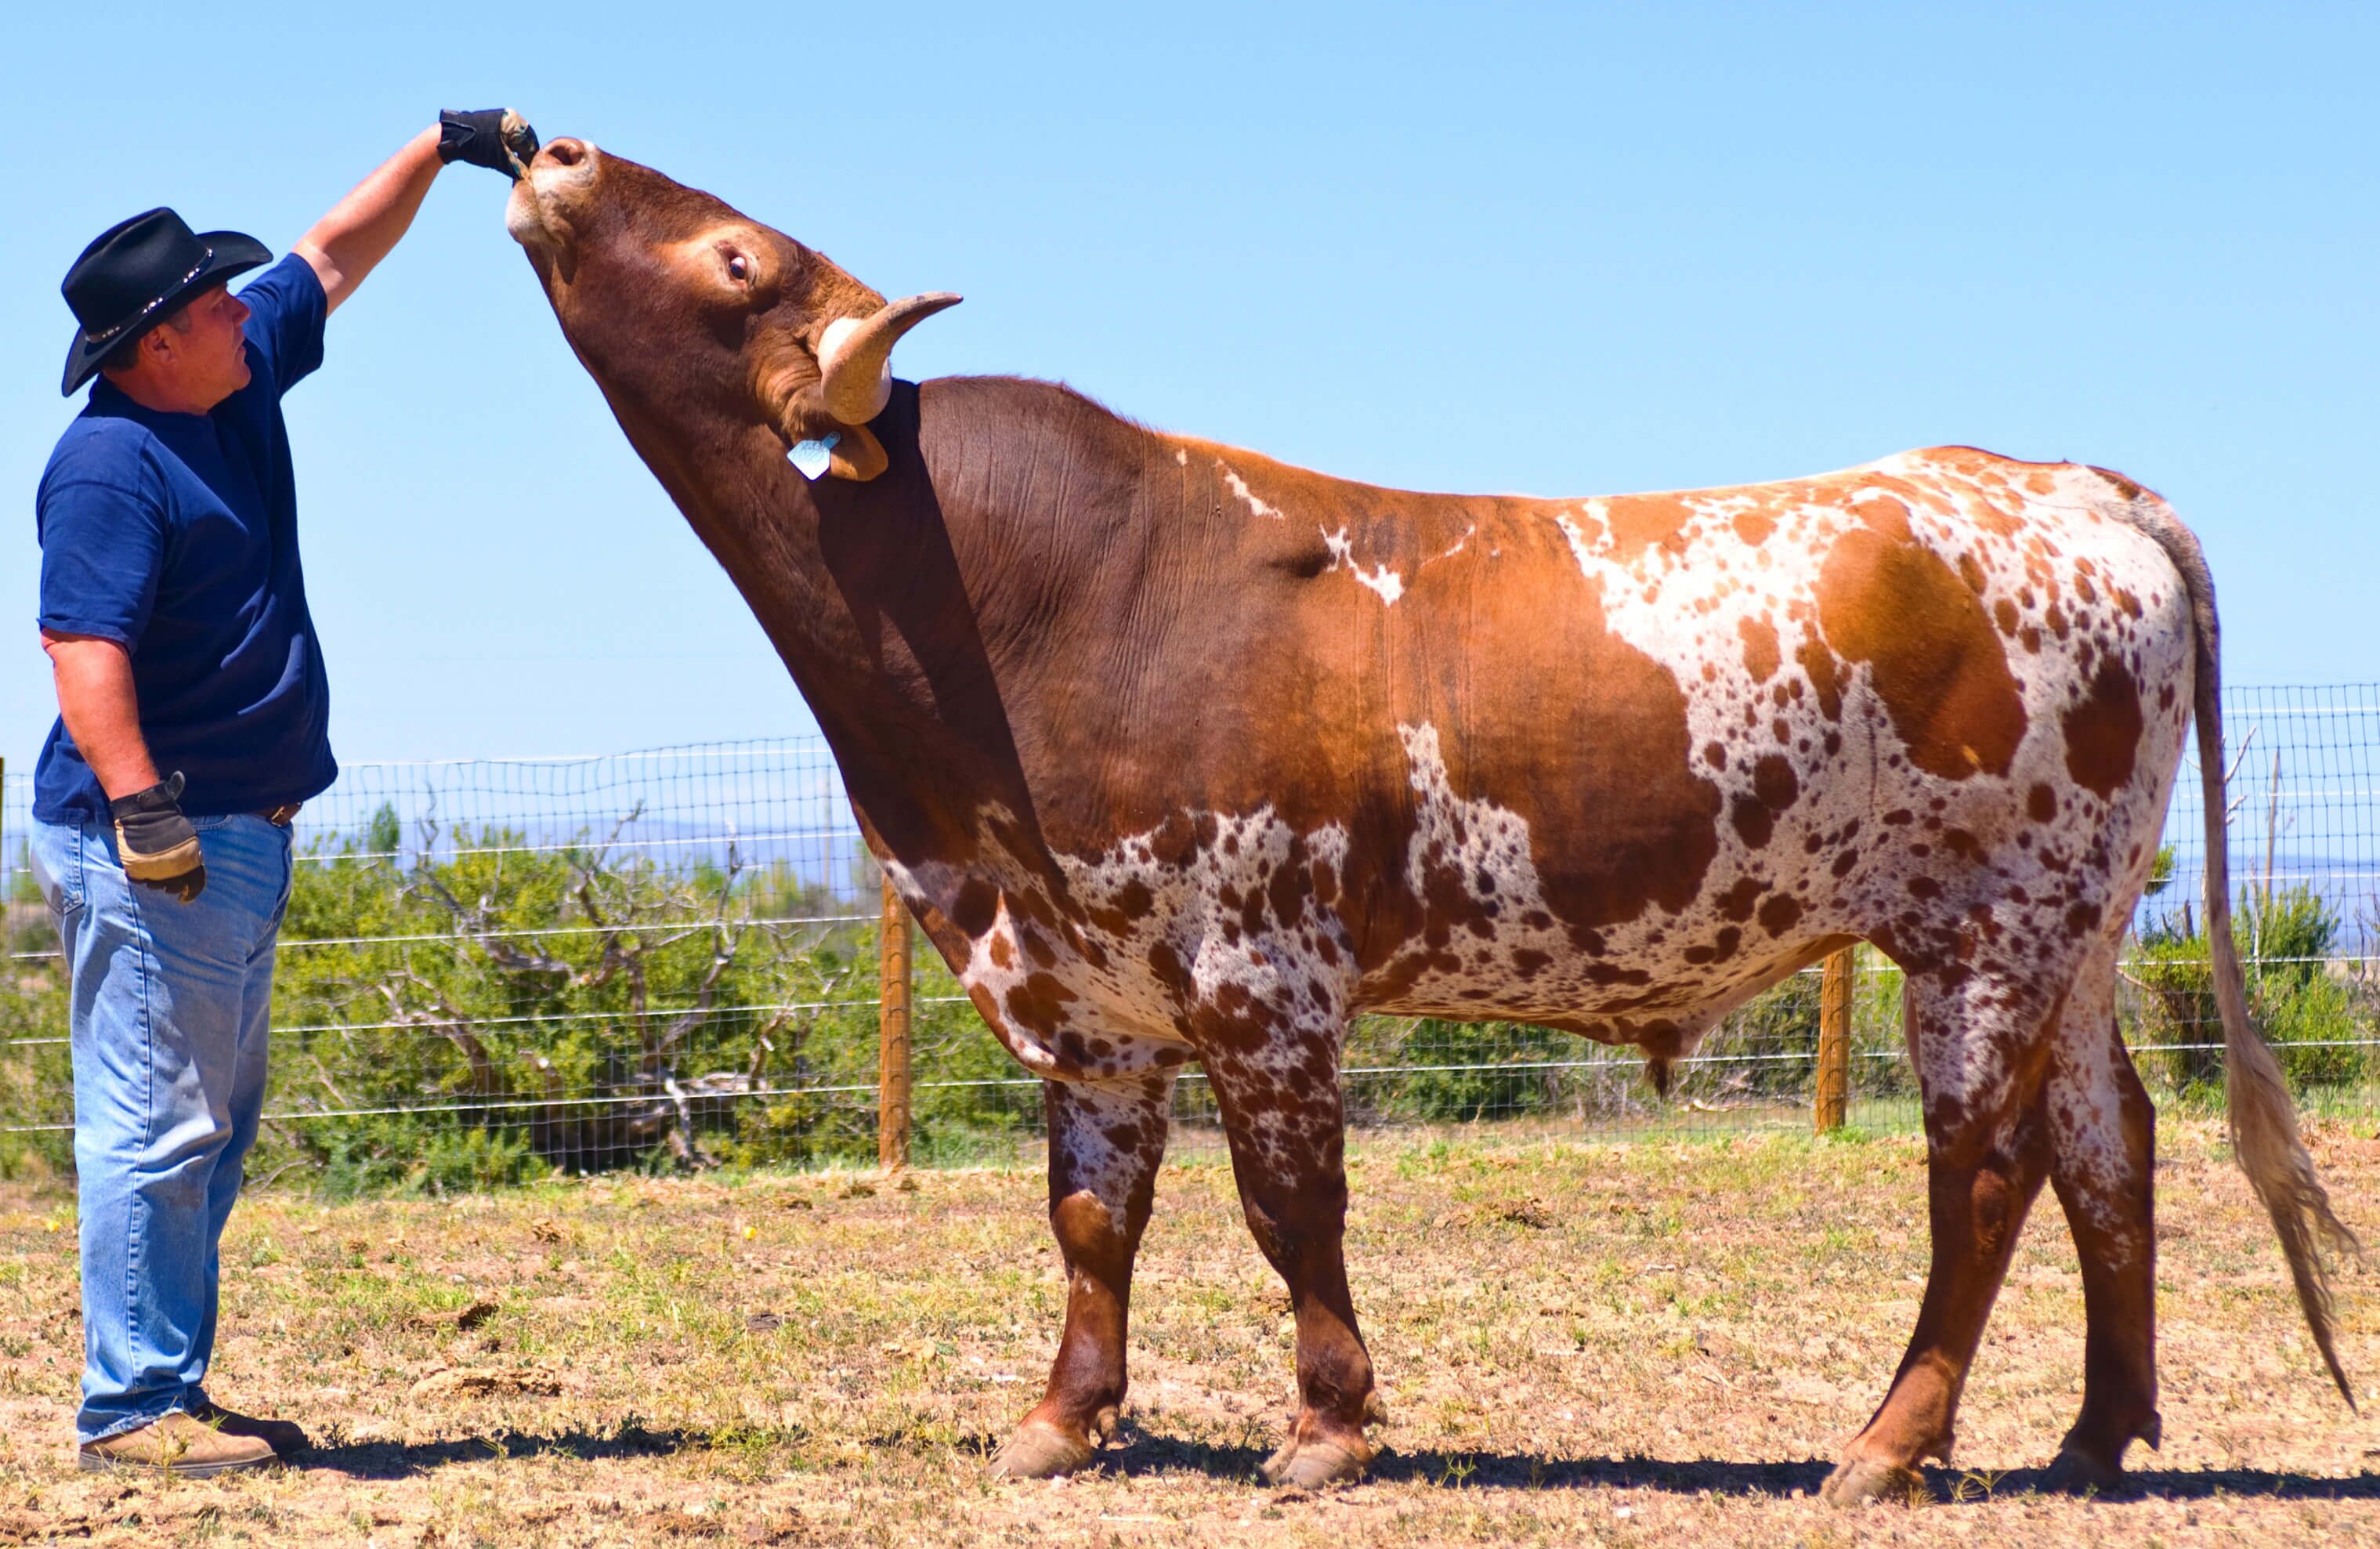 This is the safest way to had feed a Texas Longhorn.  The horns are far away from the face.  Cattle almost never walk forward because they cannot see where they are walking. It is also a time to start training them for under-neck scratching.